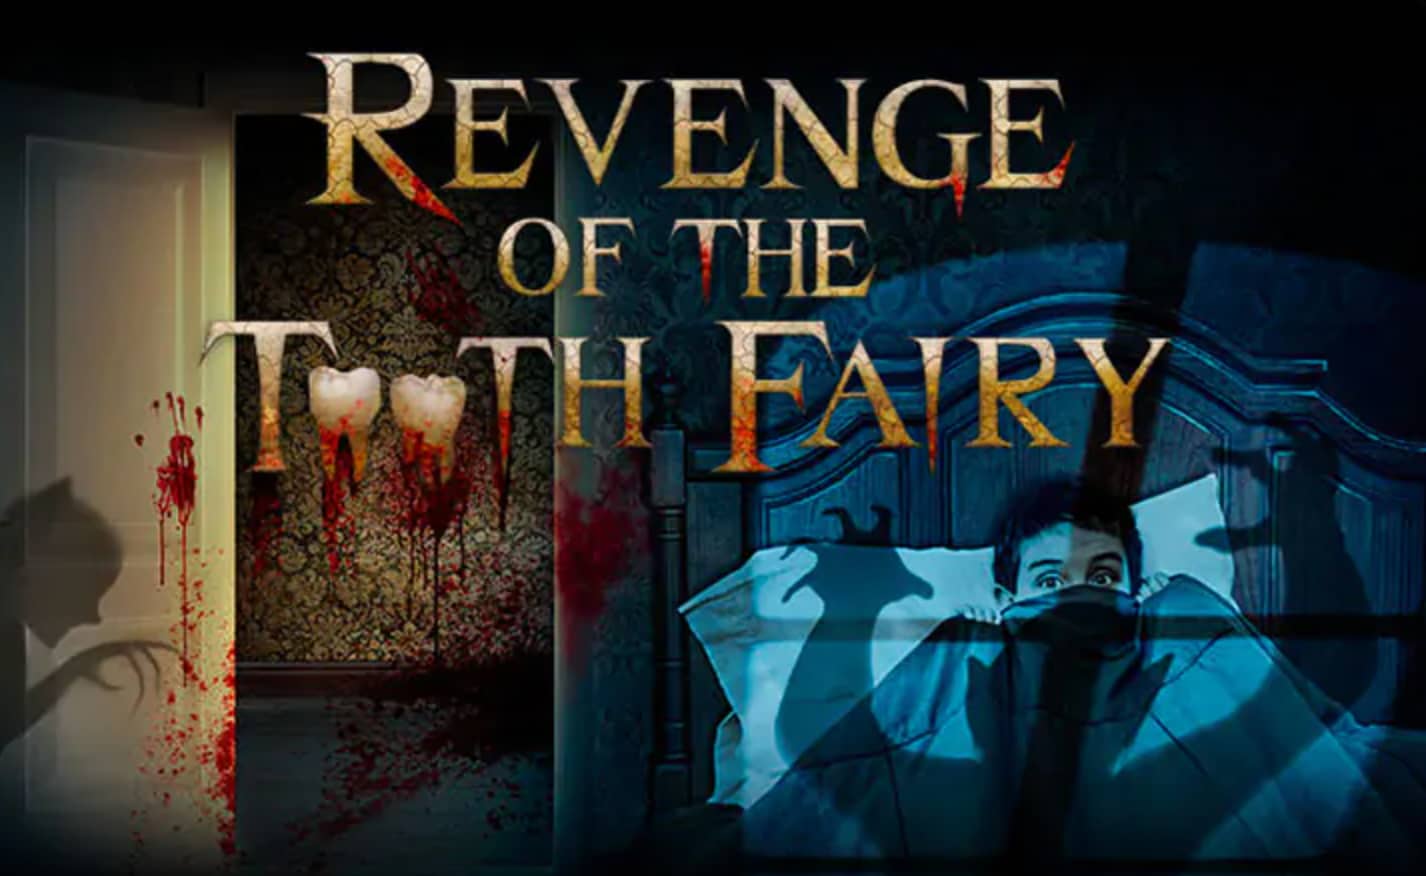 Revenge of the tooth fairy